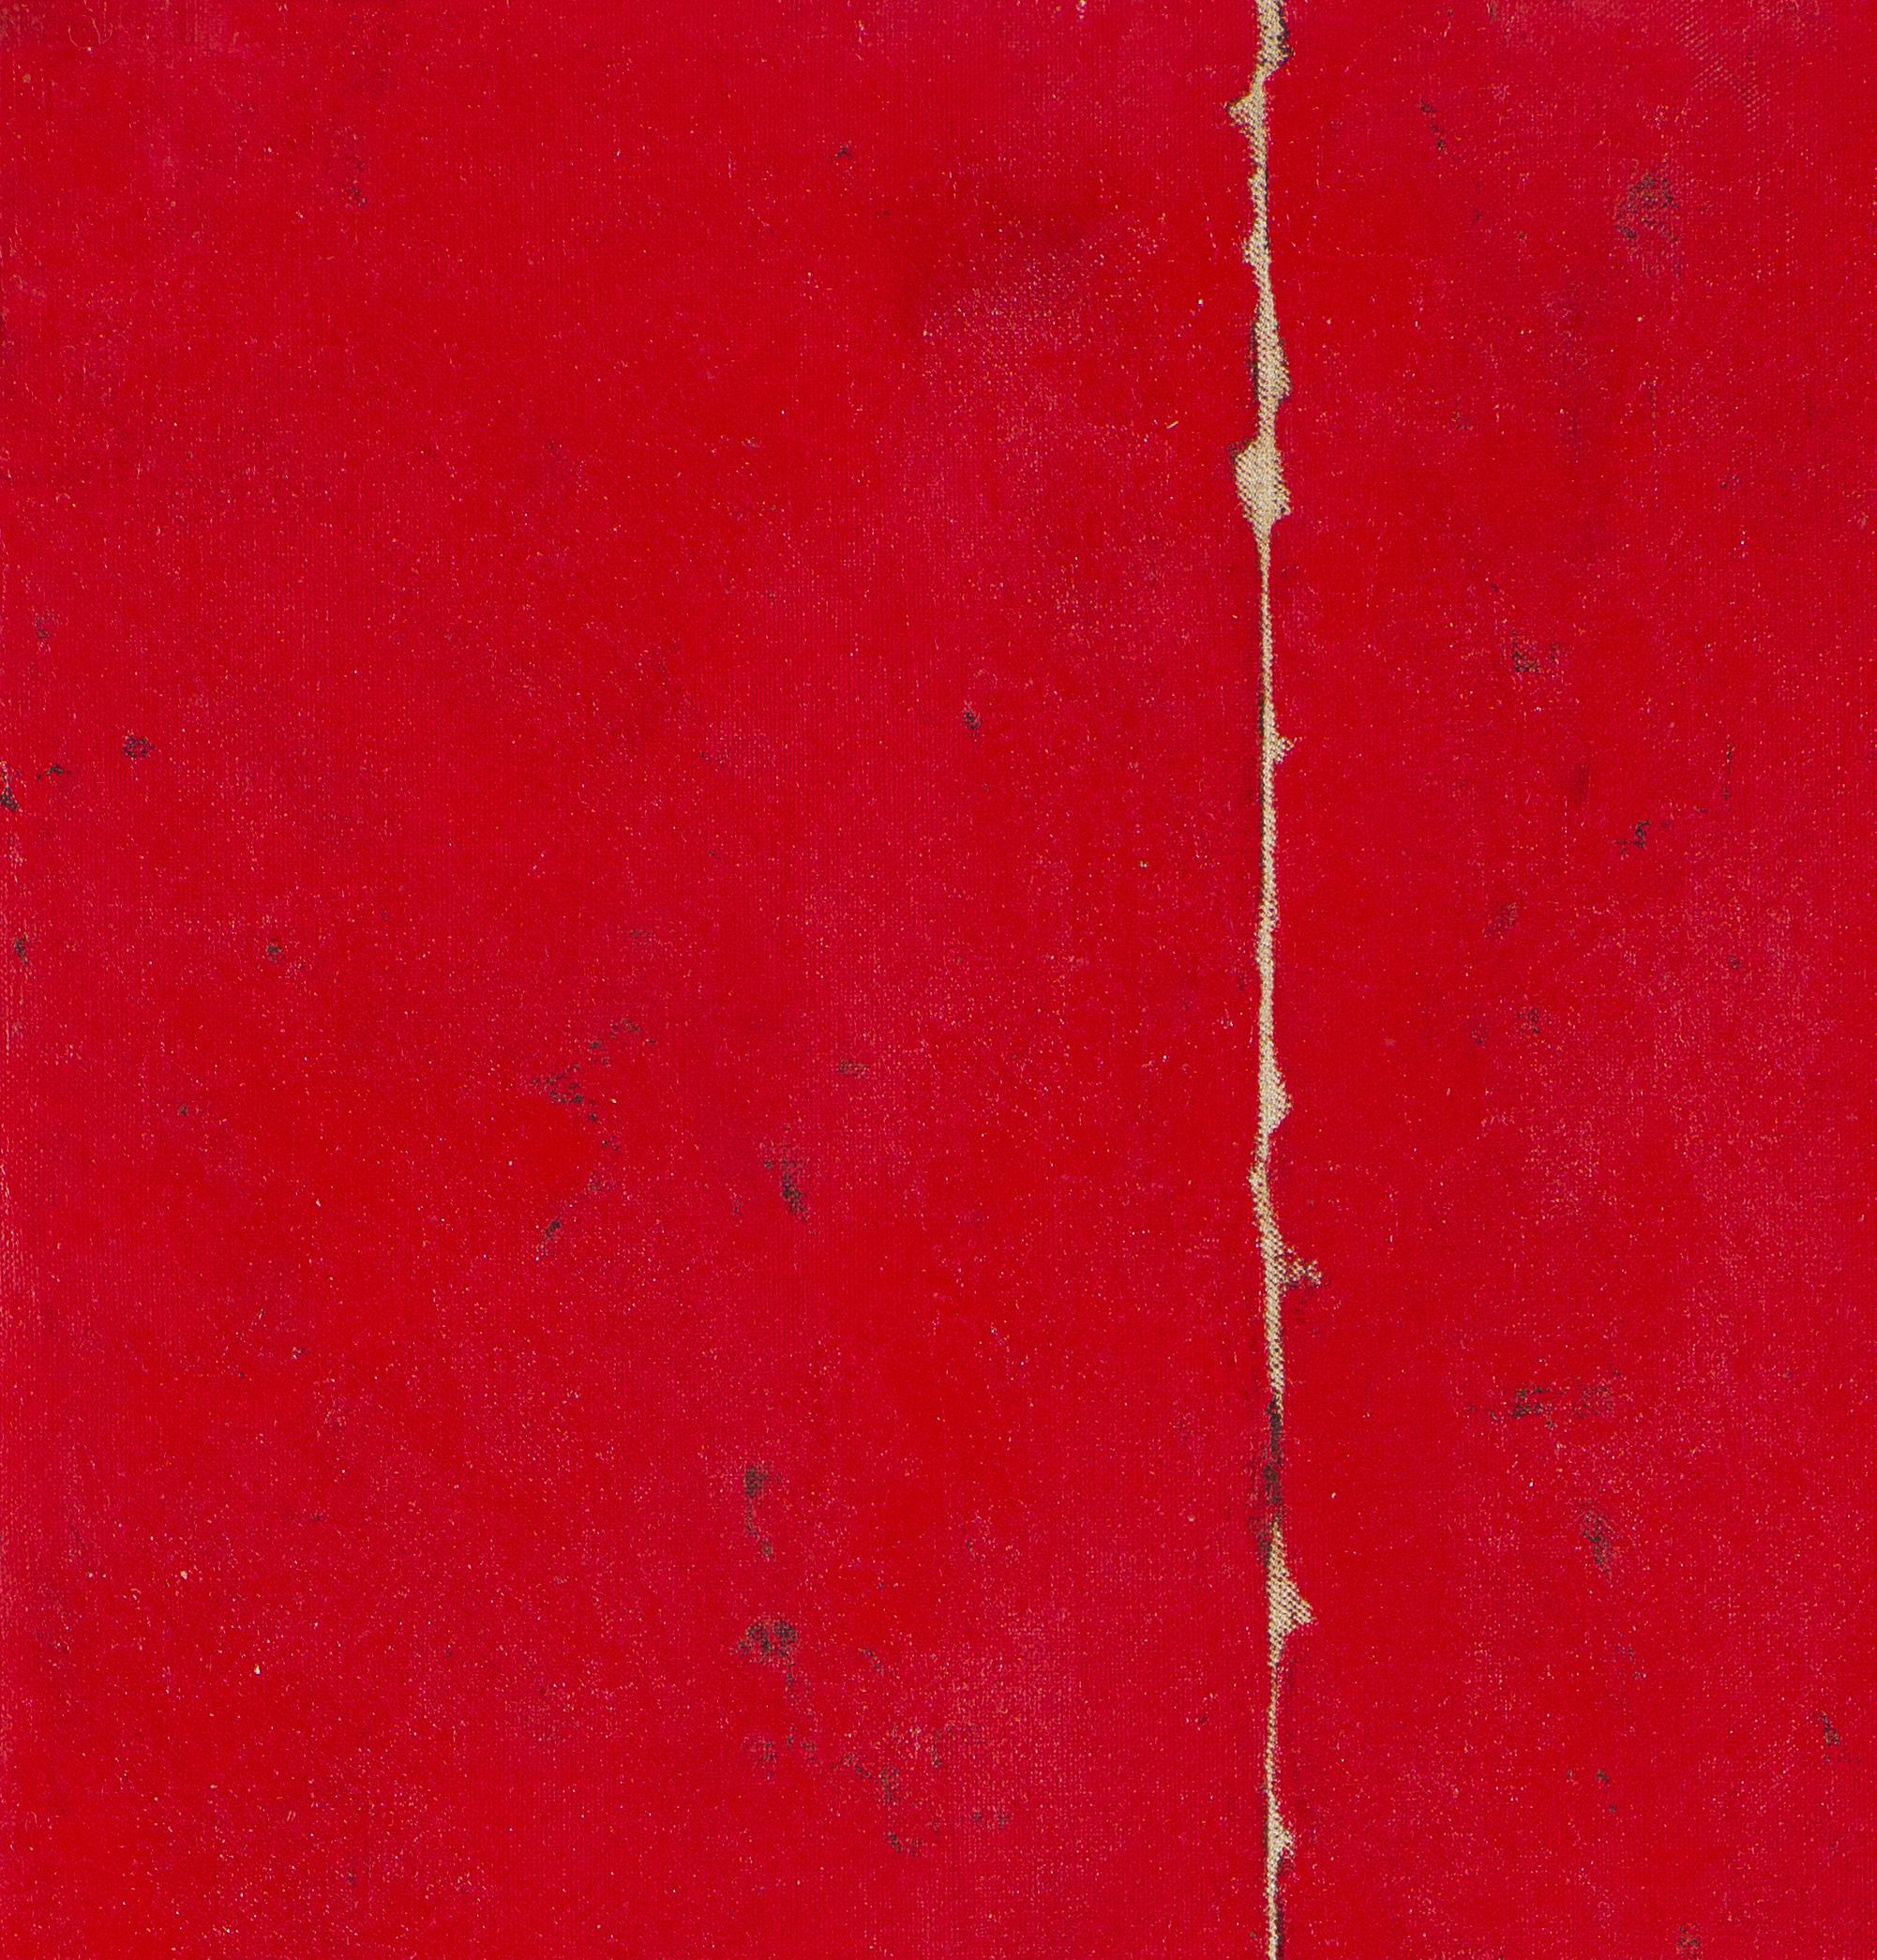 1978 (red) - Painting by Mala Breuer